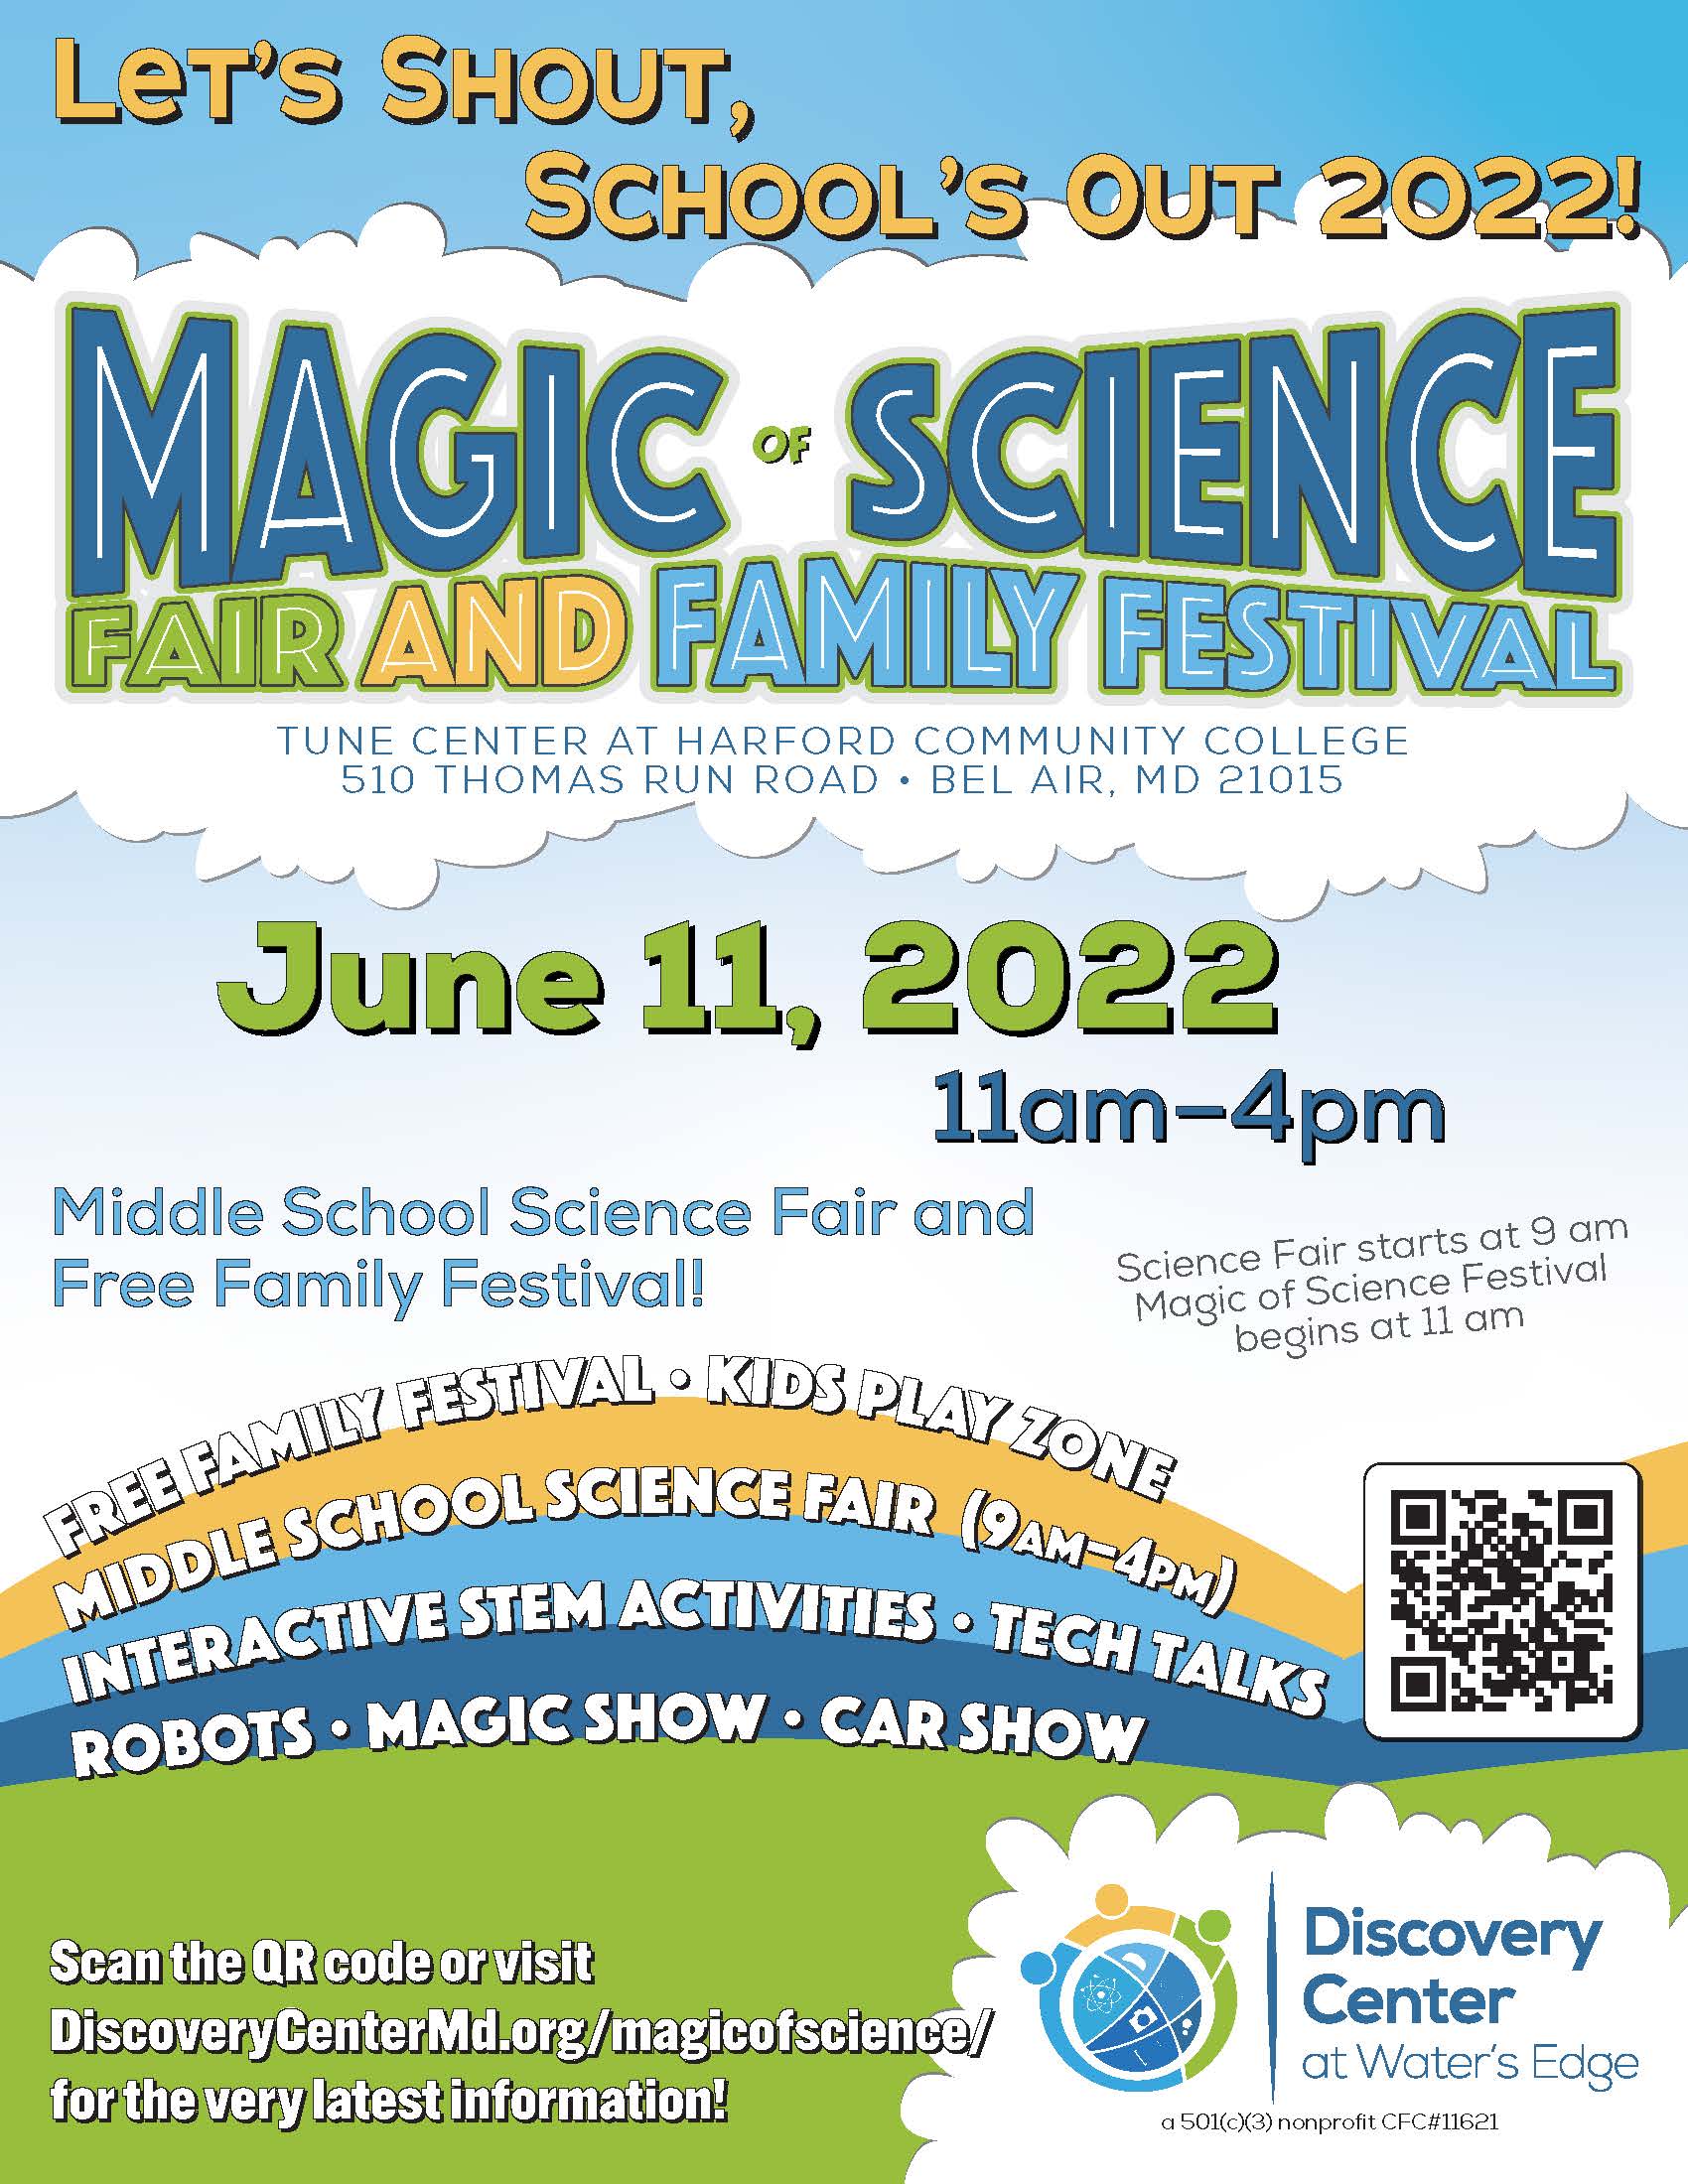 Magic of Science Fair and Family Festival